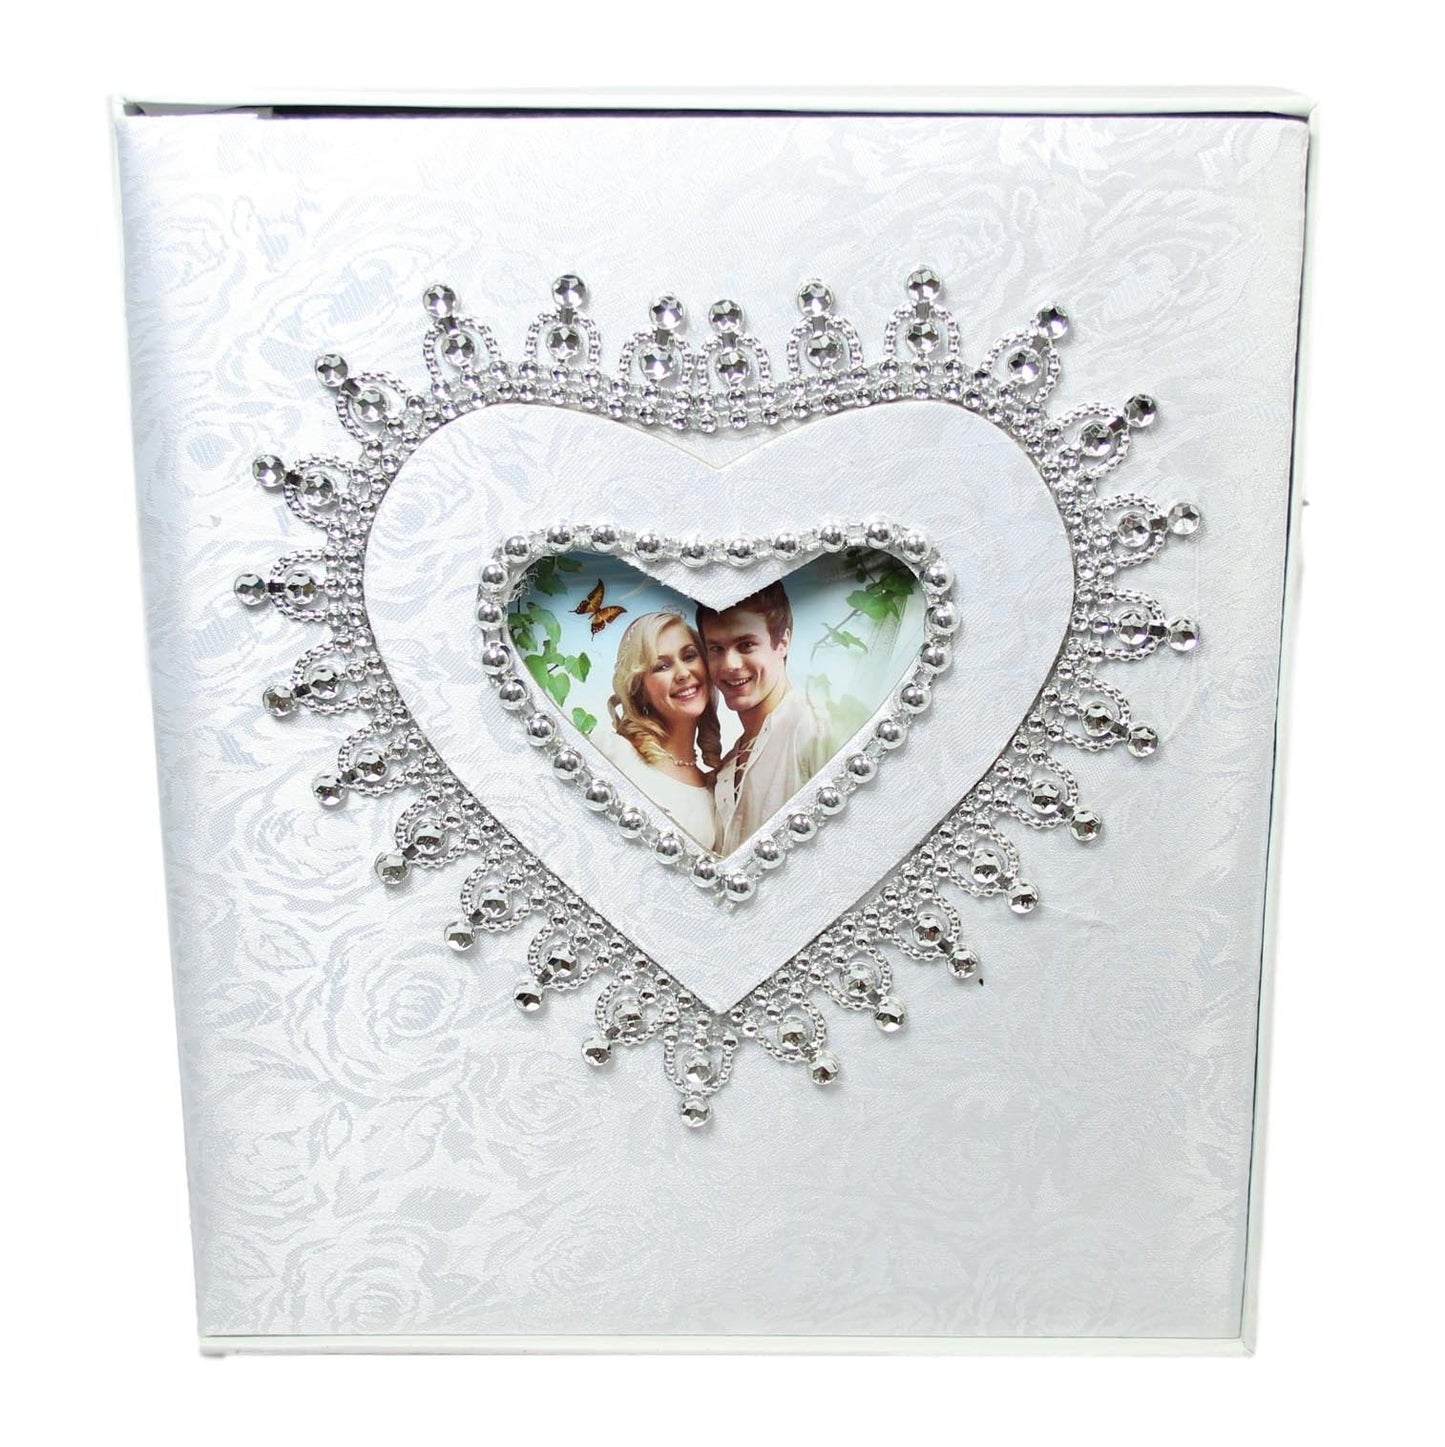 Traditional Royal White Wedding Photo Album With Box 25 Pages 4 x 6'' 5529 (Parcel Rate)